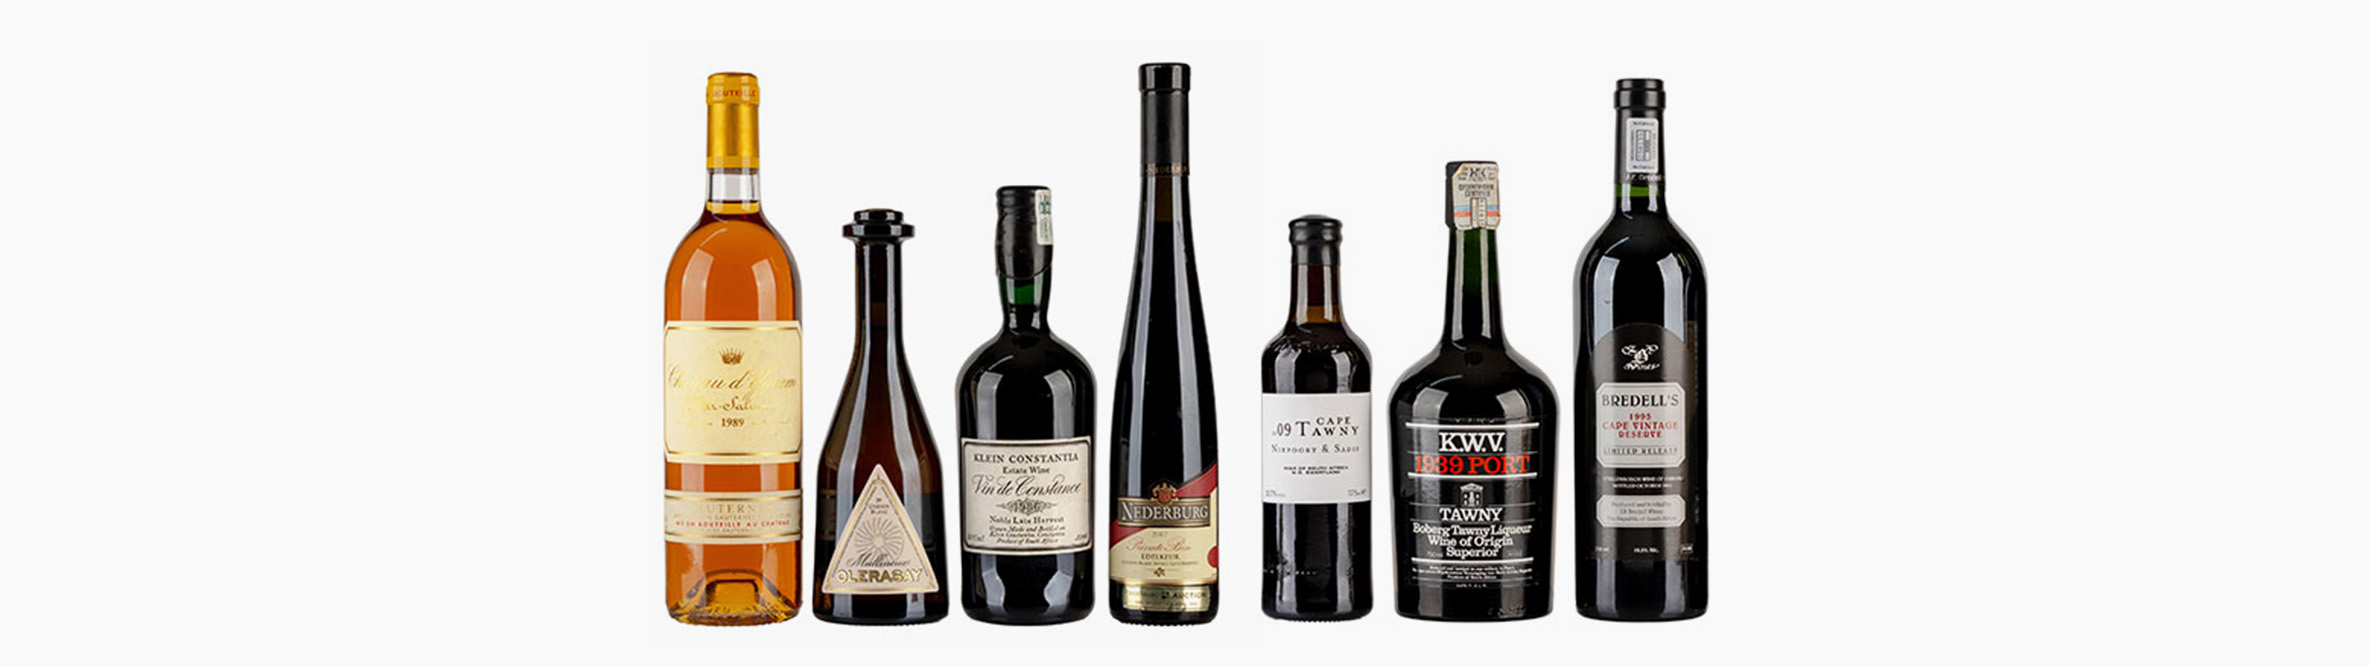 Sweets & Fortified Wine Auction: a rich offering of vintage wines that have stood the test of time